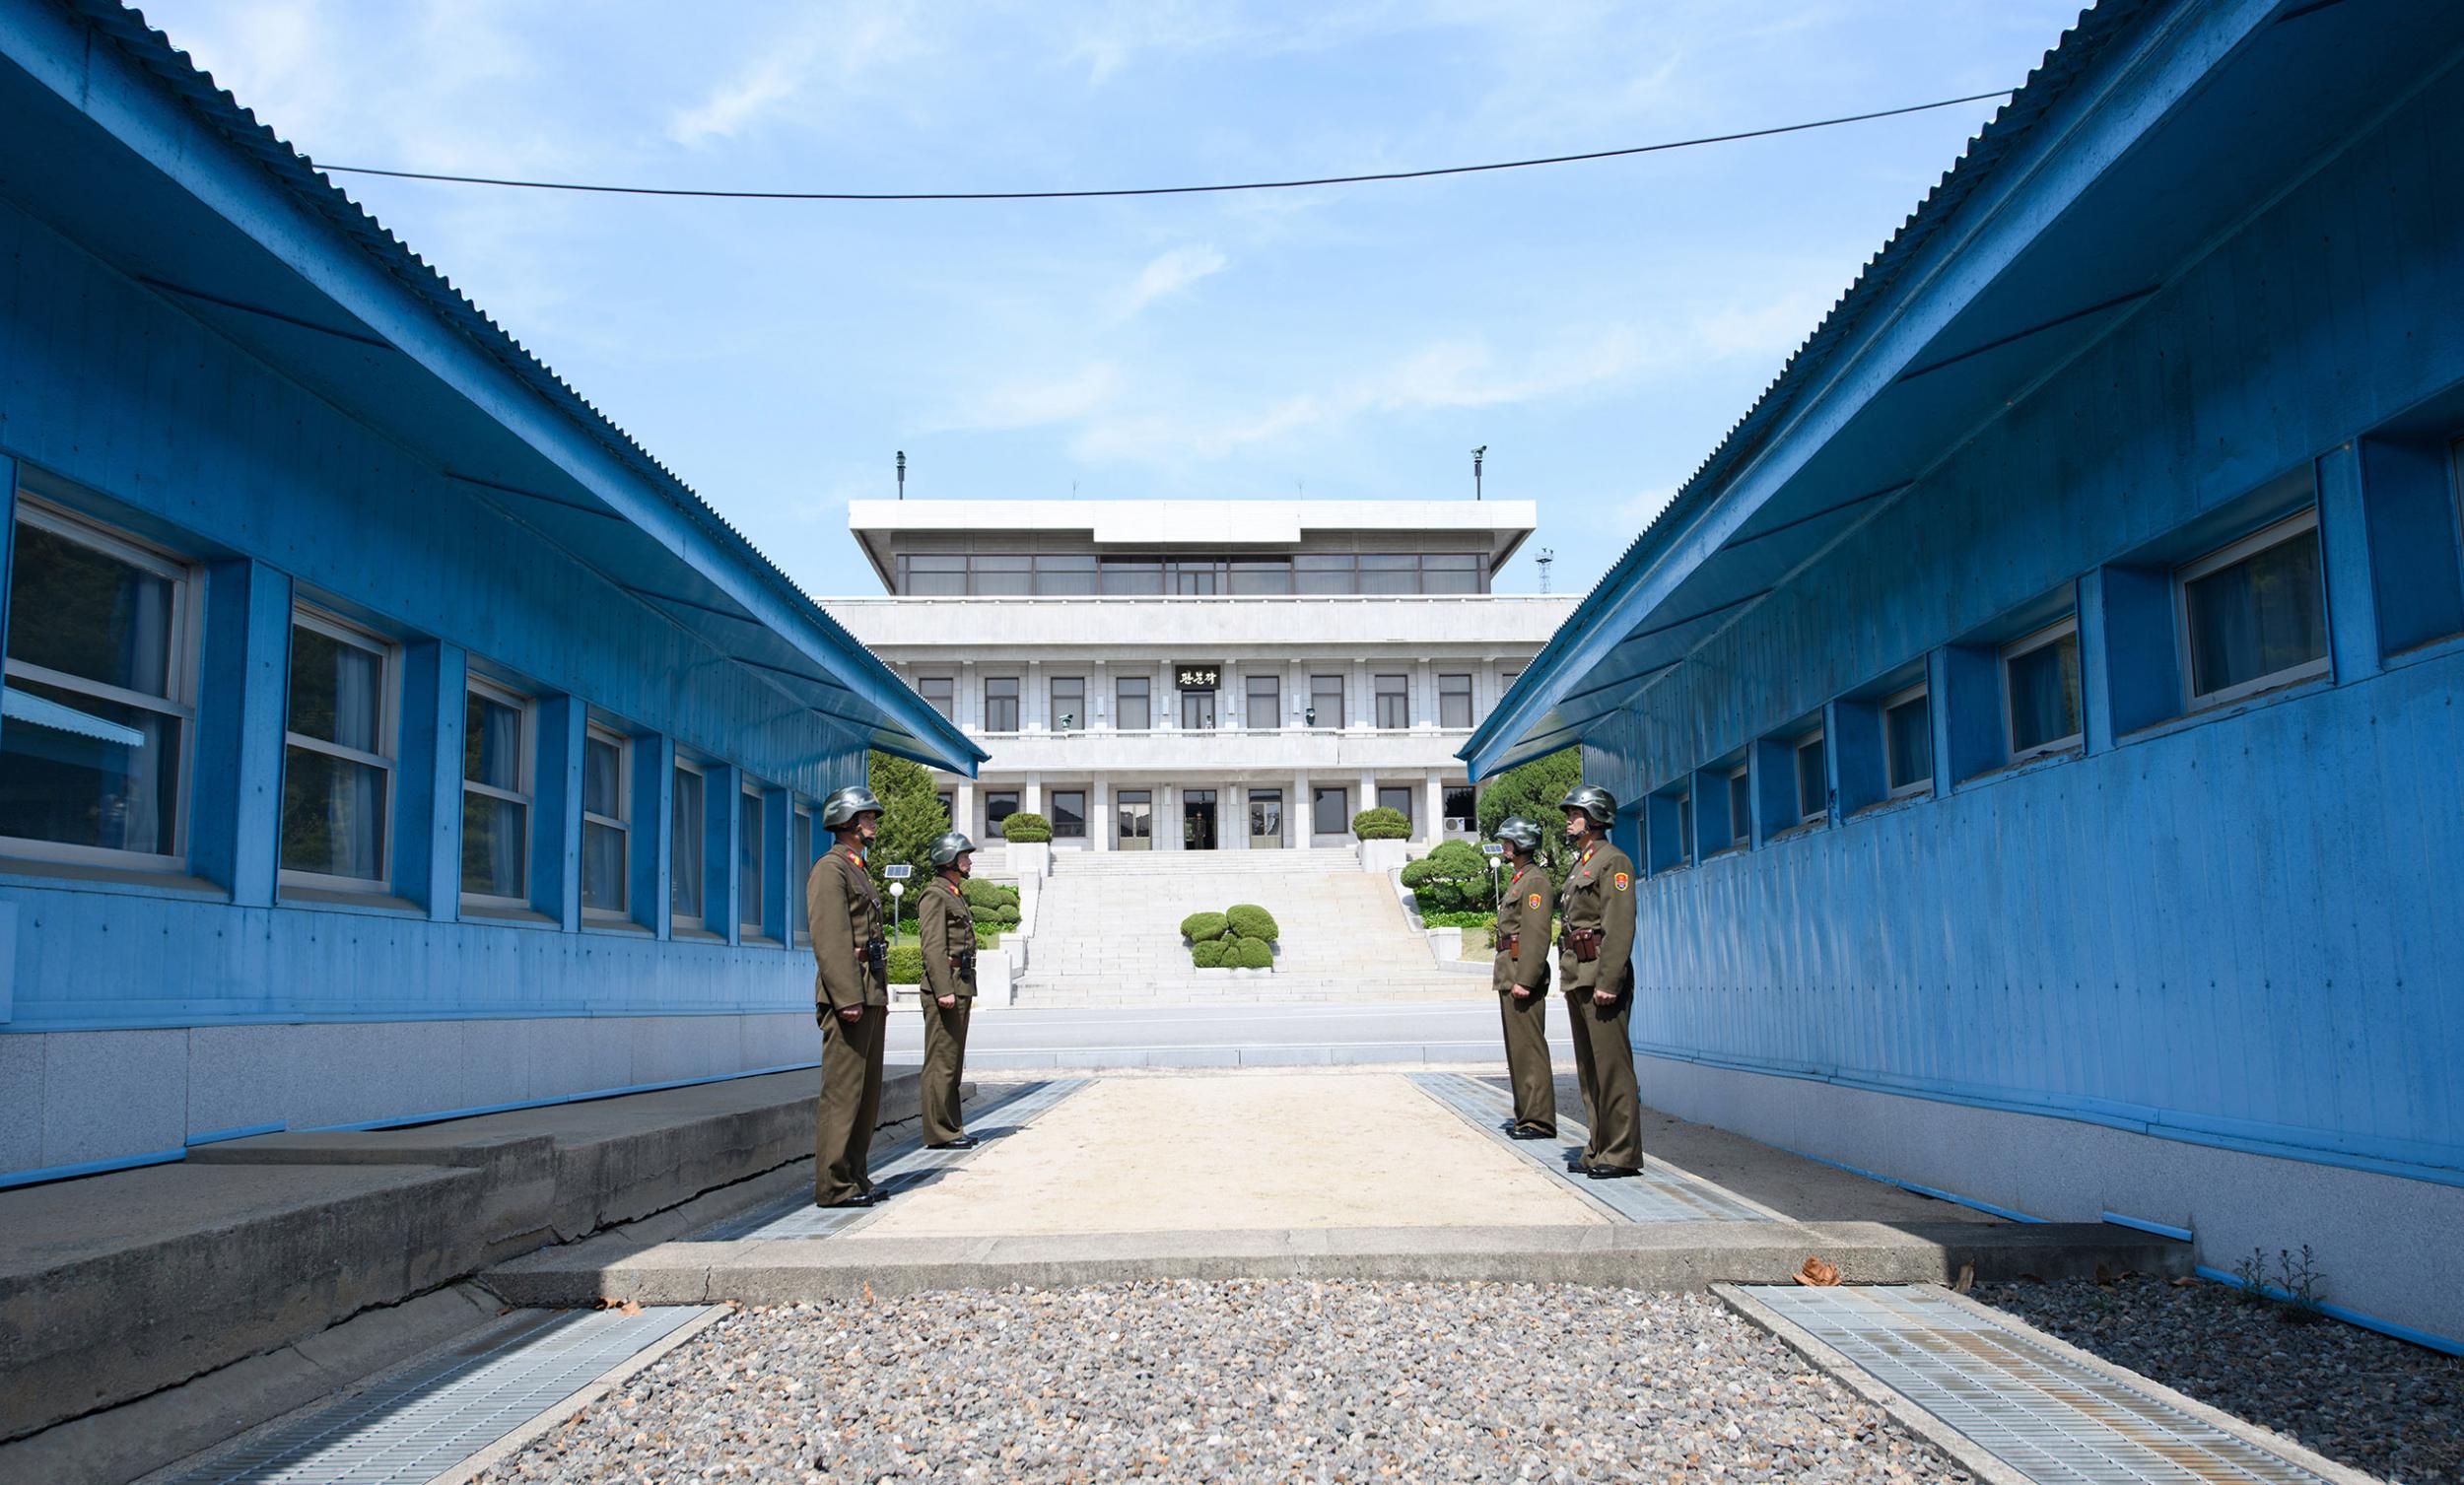 DMZ: What it's like to visit the North Korean border | The Independent